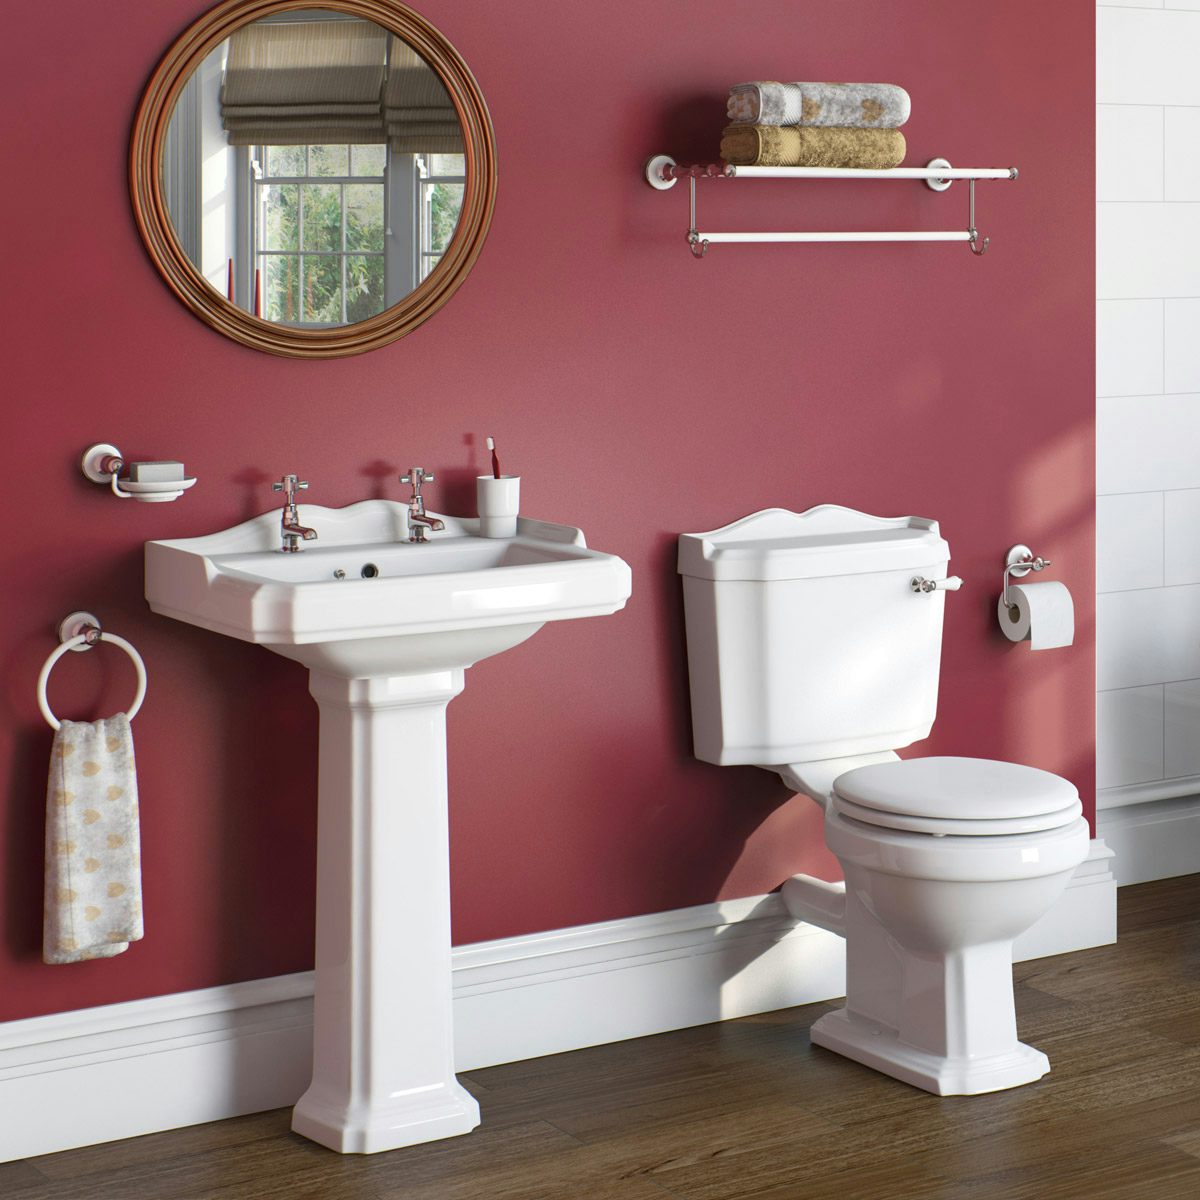 Winchester Close coupled Toilet Suite with White seat and Full Pedestal Basin 600mm The Bath Co